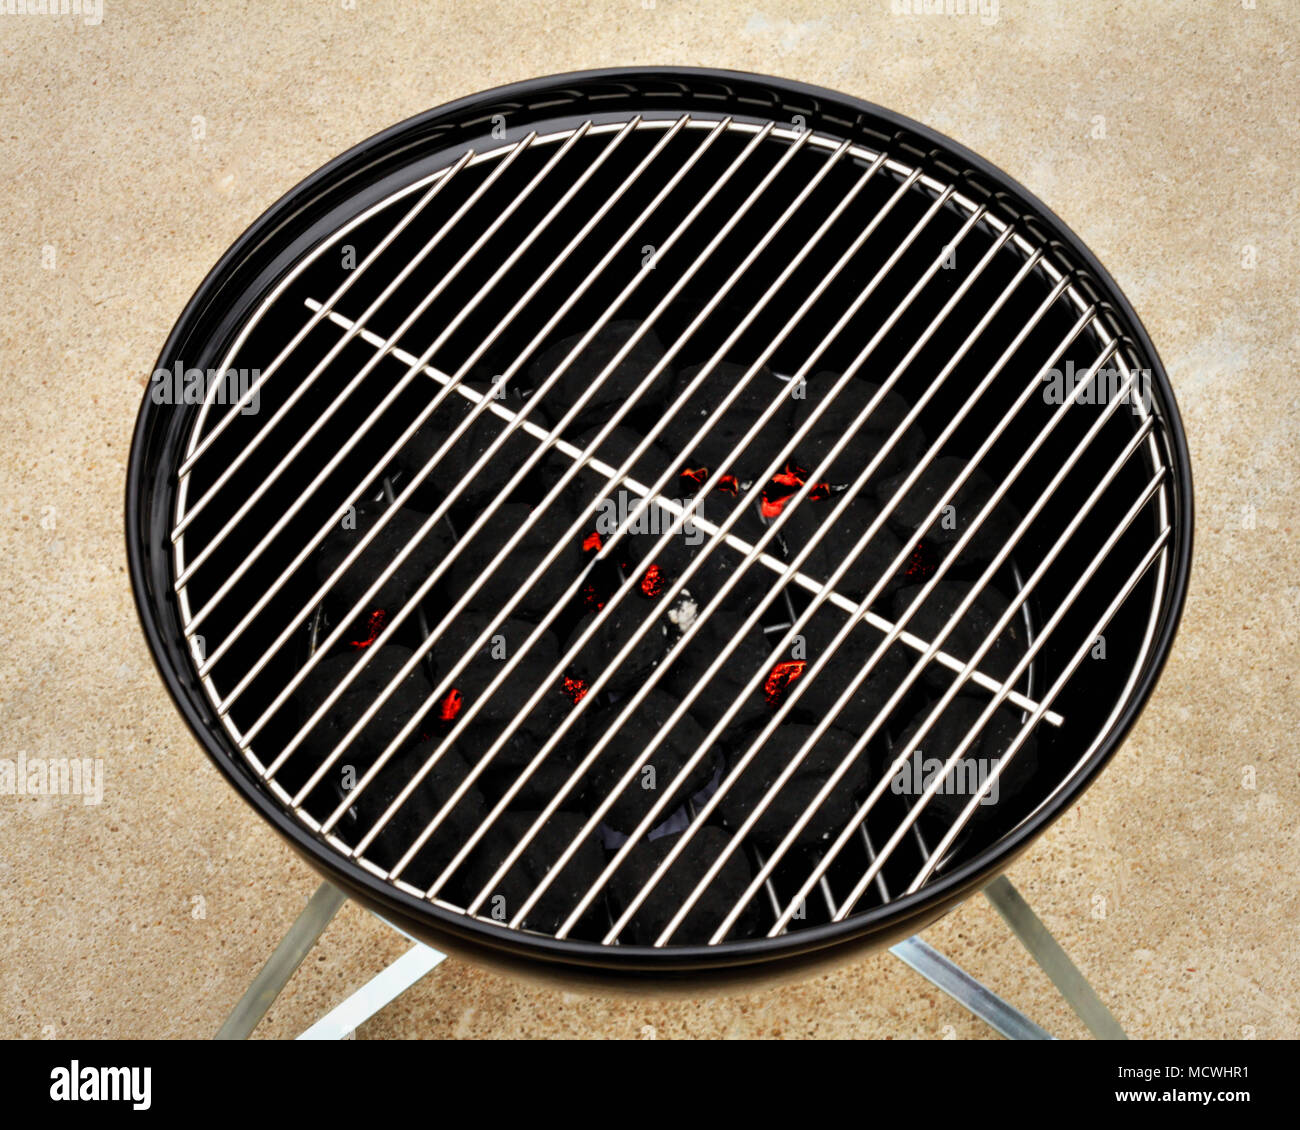 Embers begin to glow under the grate of a small barbecue grill. Stock Photo